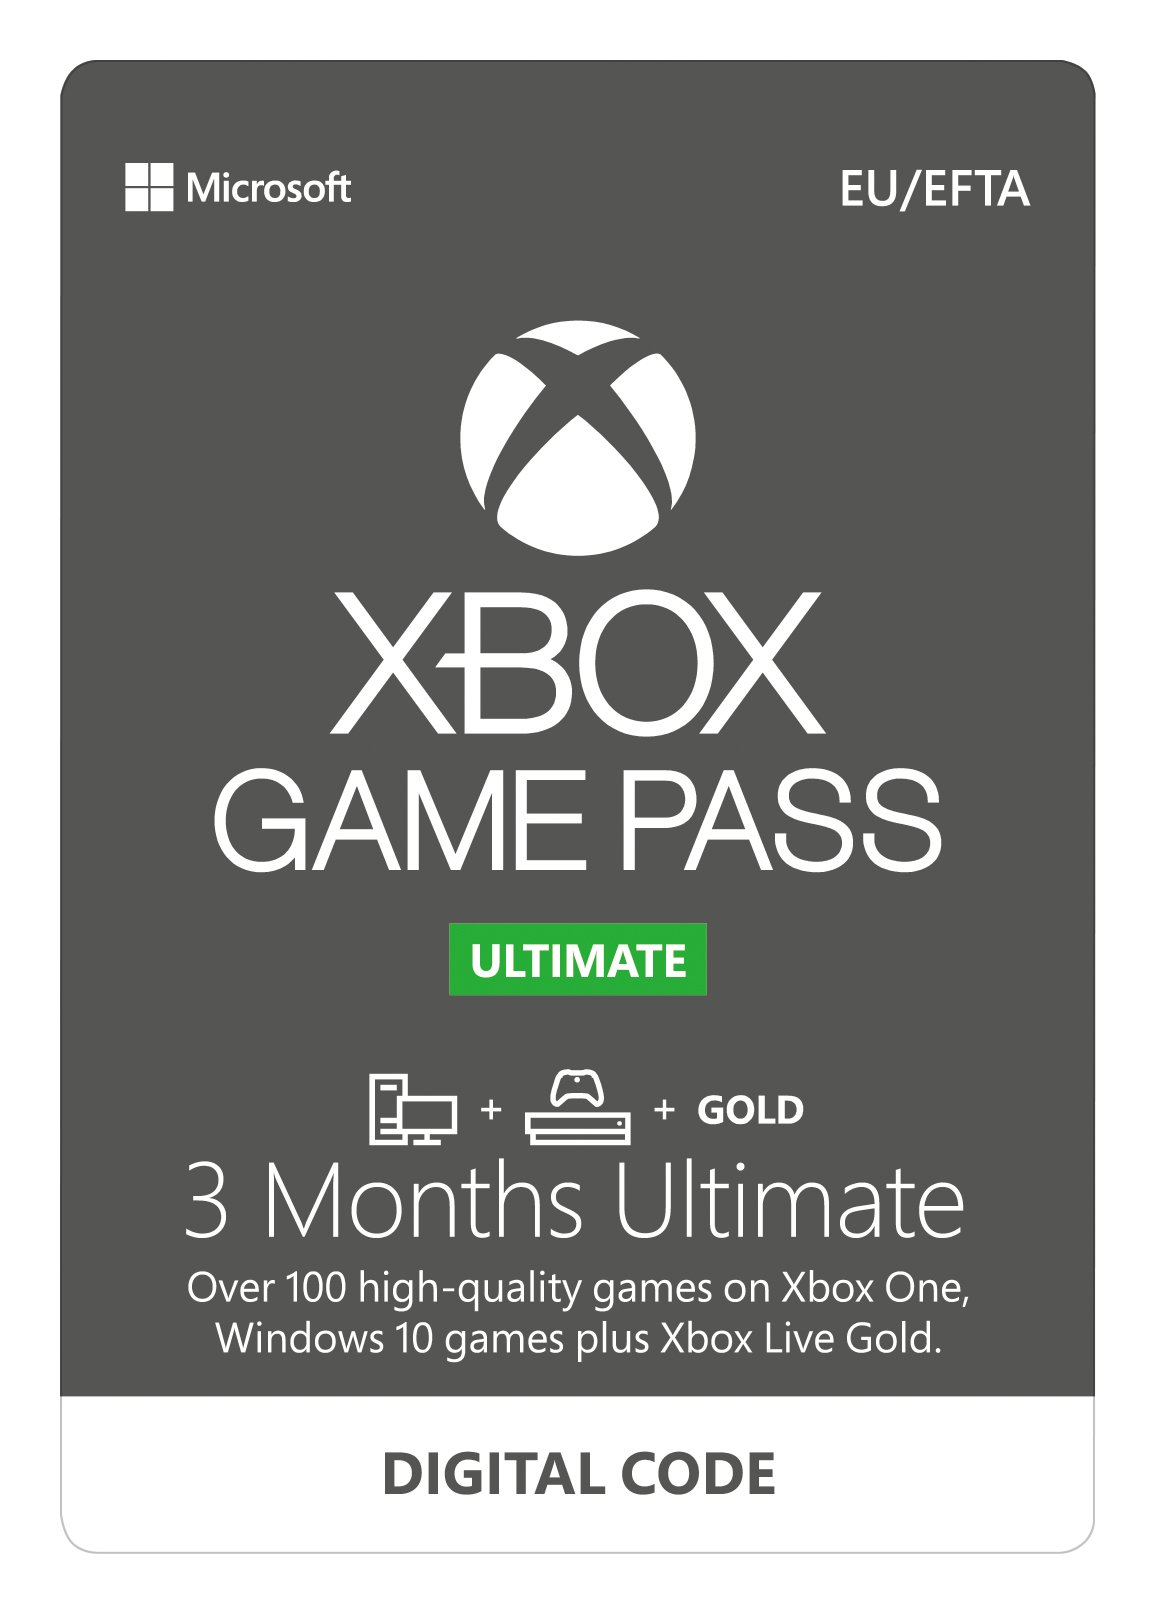 how much is xbox game pass per month?